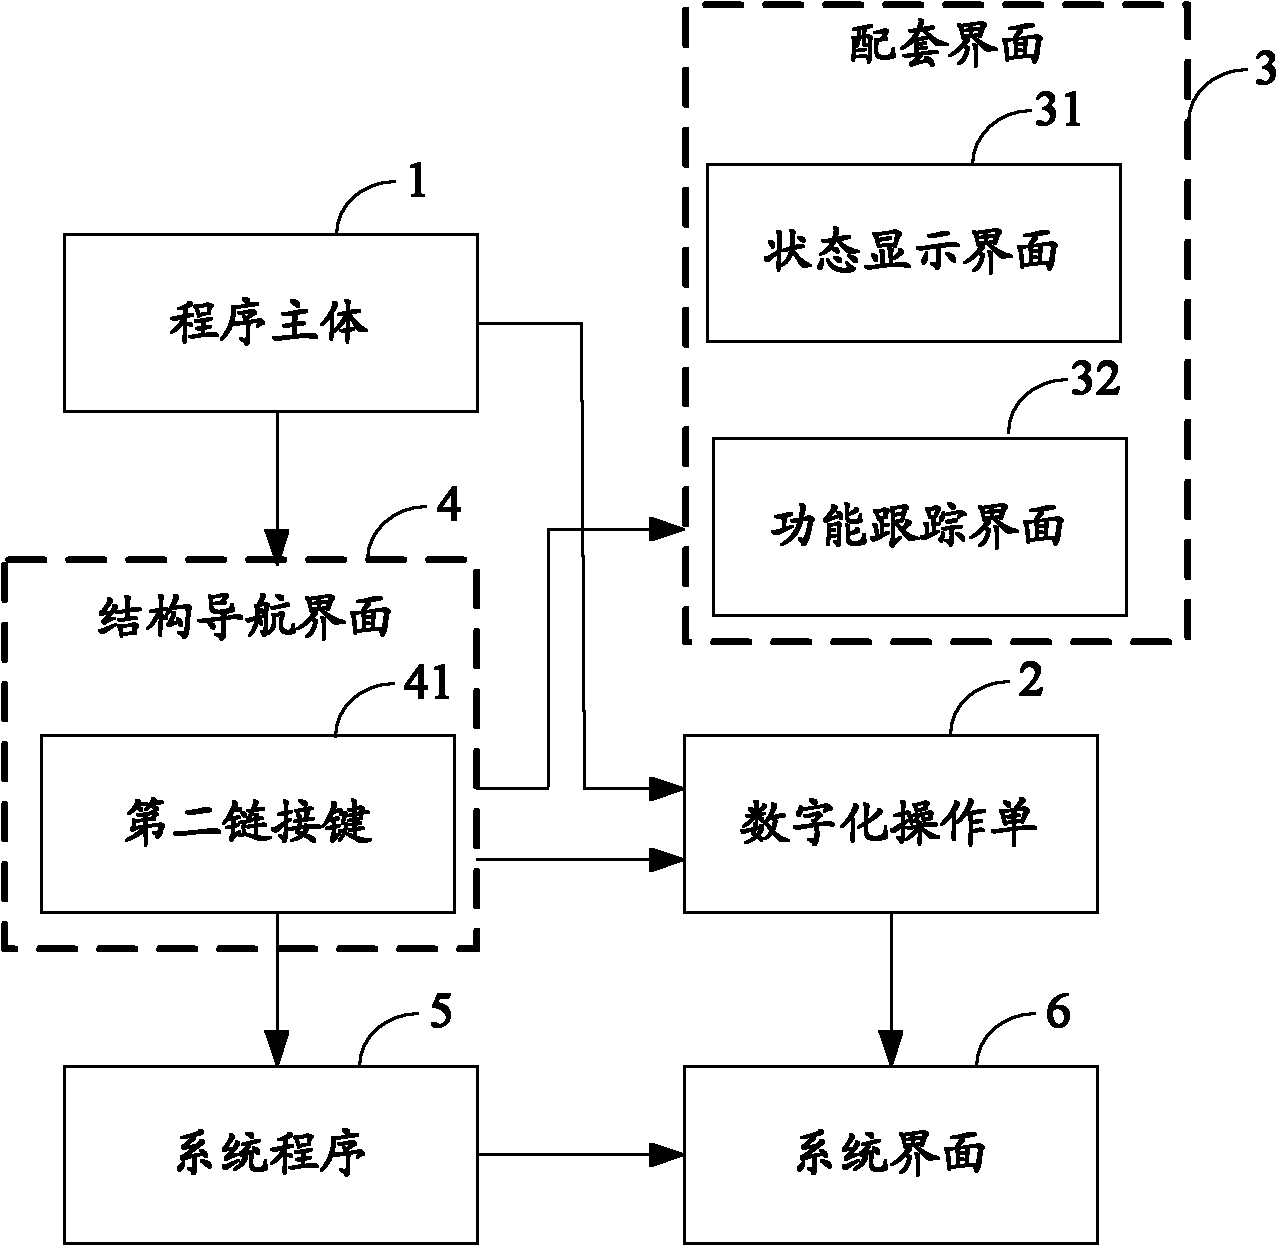 Method and system for digitalizing overall grogram of nuclear power plant and digital control system (DCS) control system